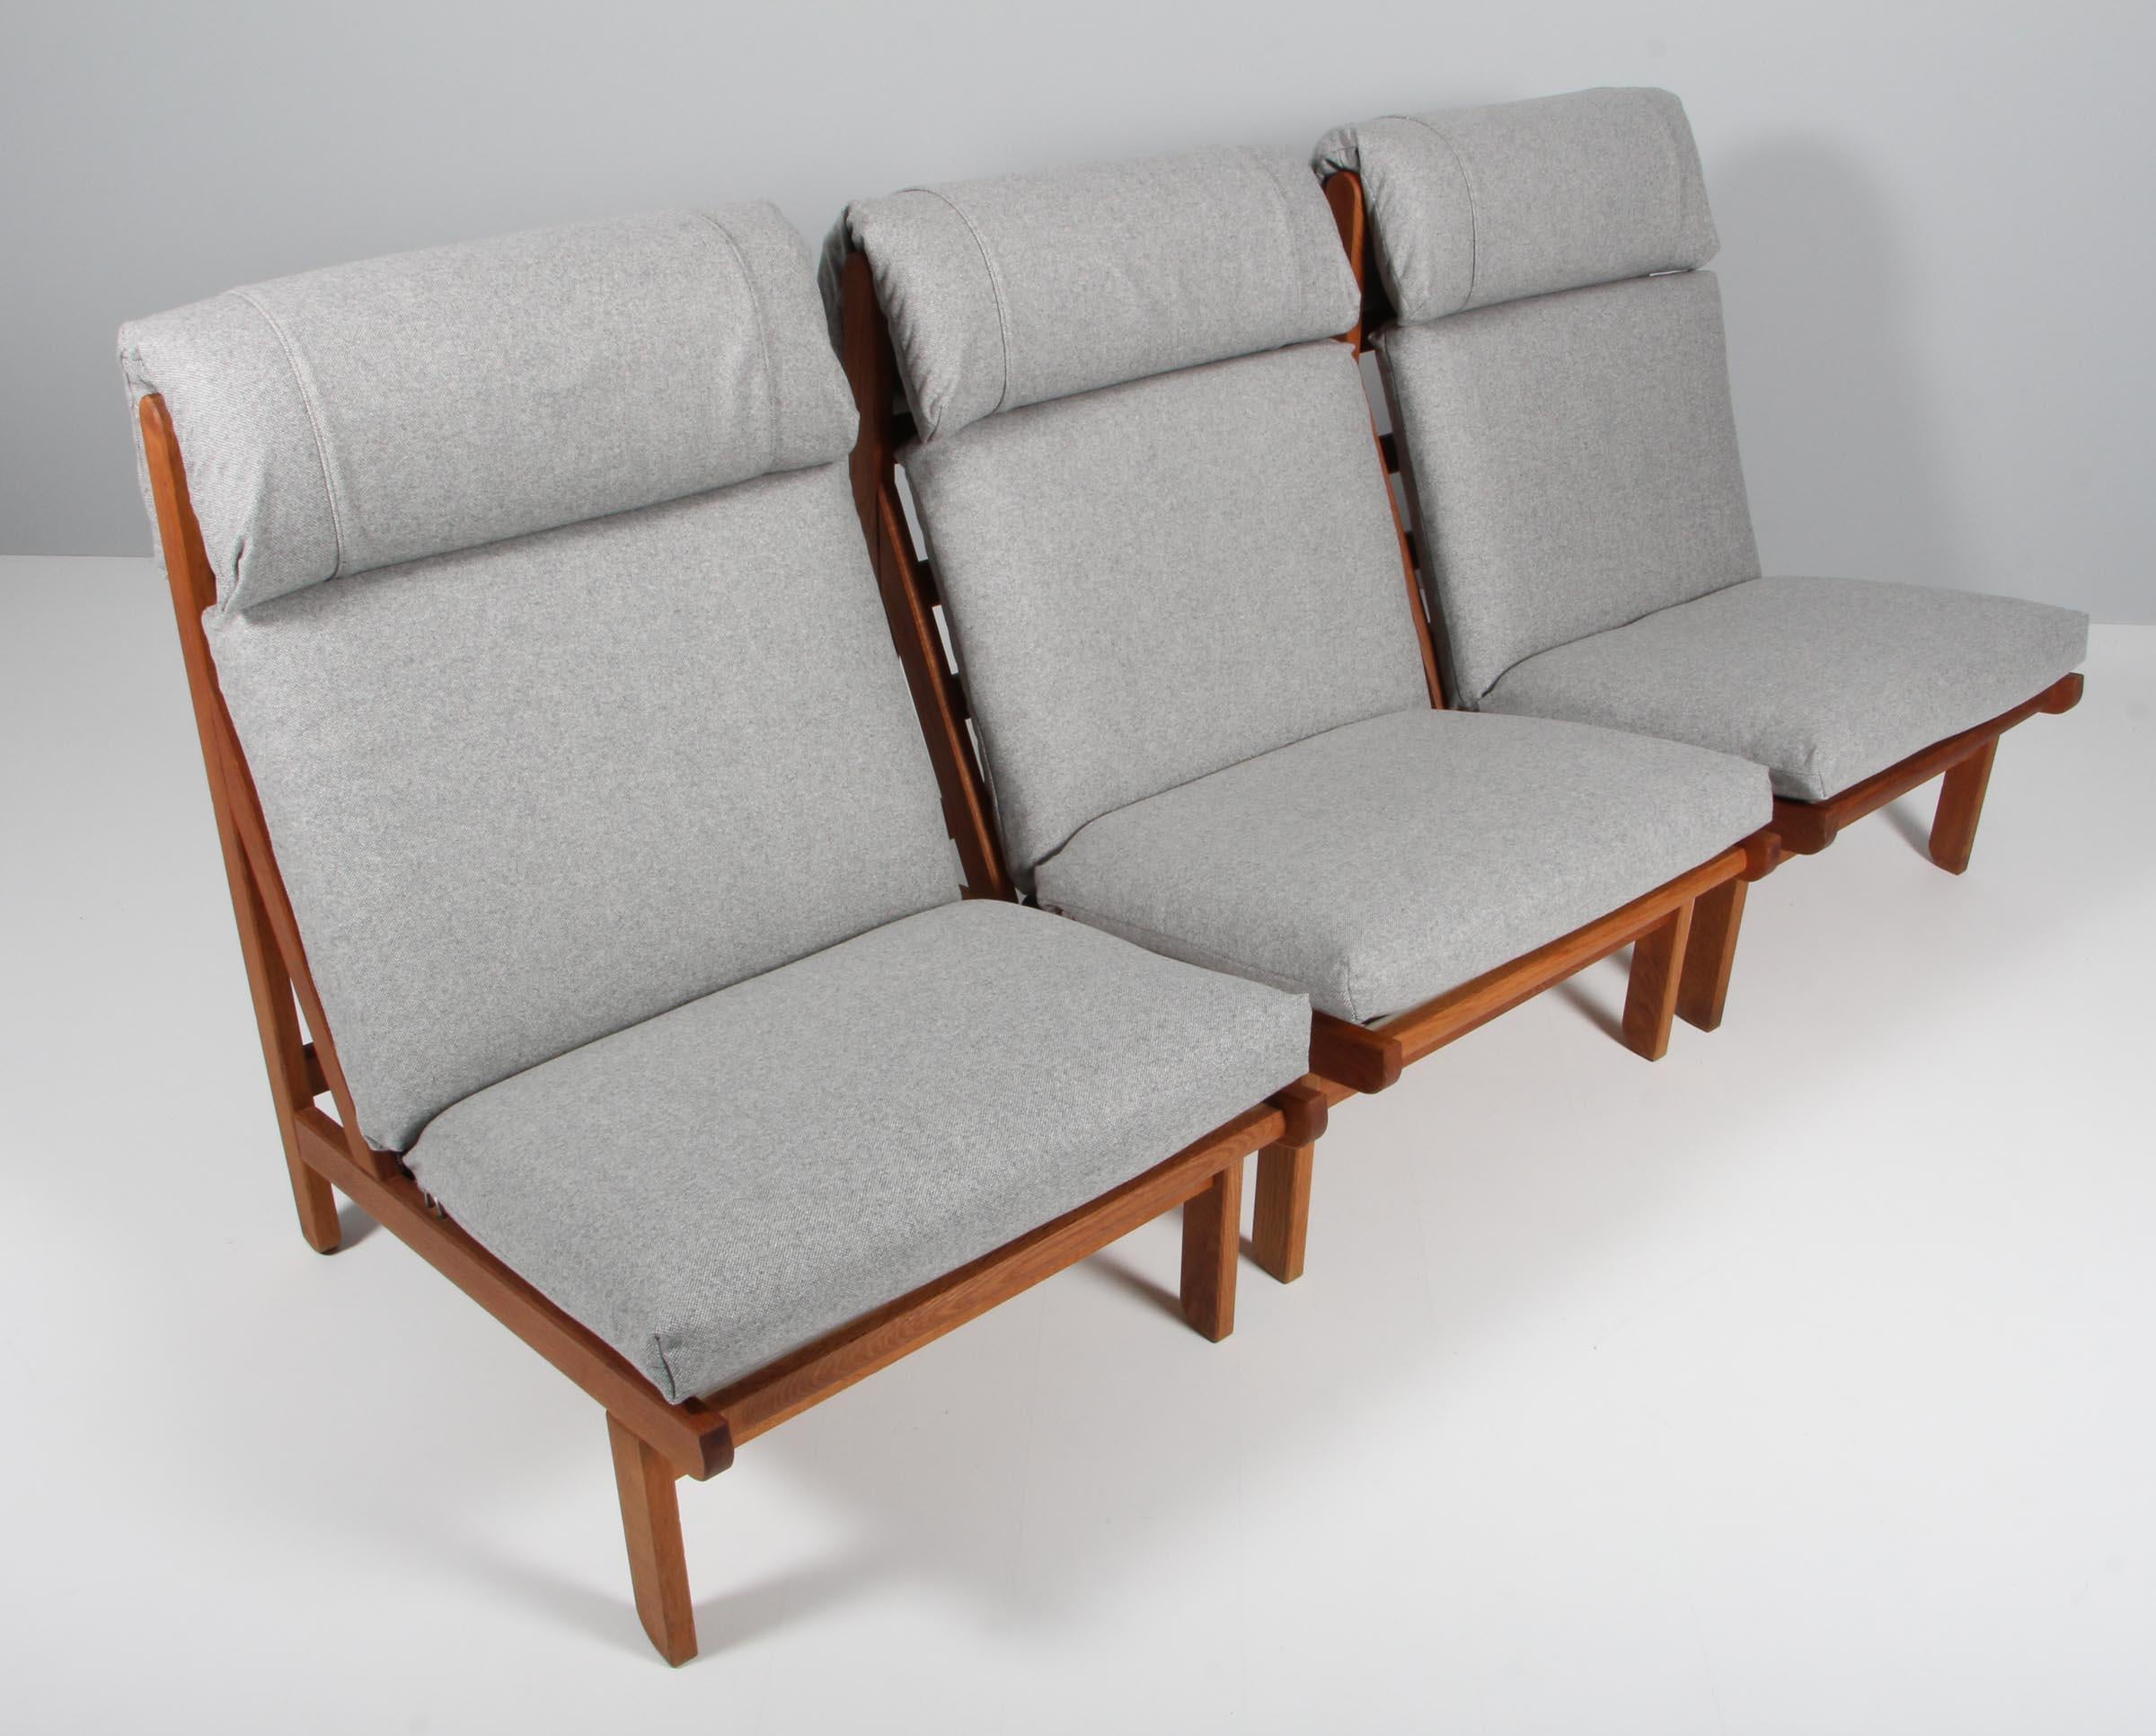 Rare and very sought after set of easy lounge chair designed by Bernt Petersen for Schiang Furniture of Denmark in 1966. Oak frames with loose cushions in seat and back upholstered with Magrethe wool from Nevotex. The chairs are very comfortable